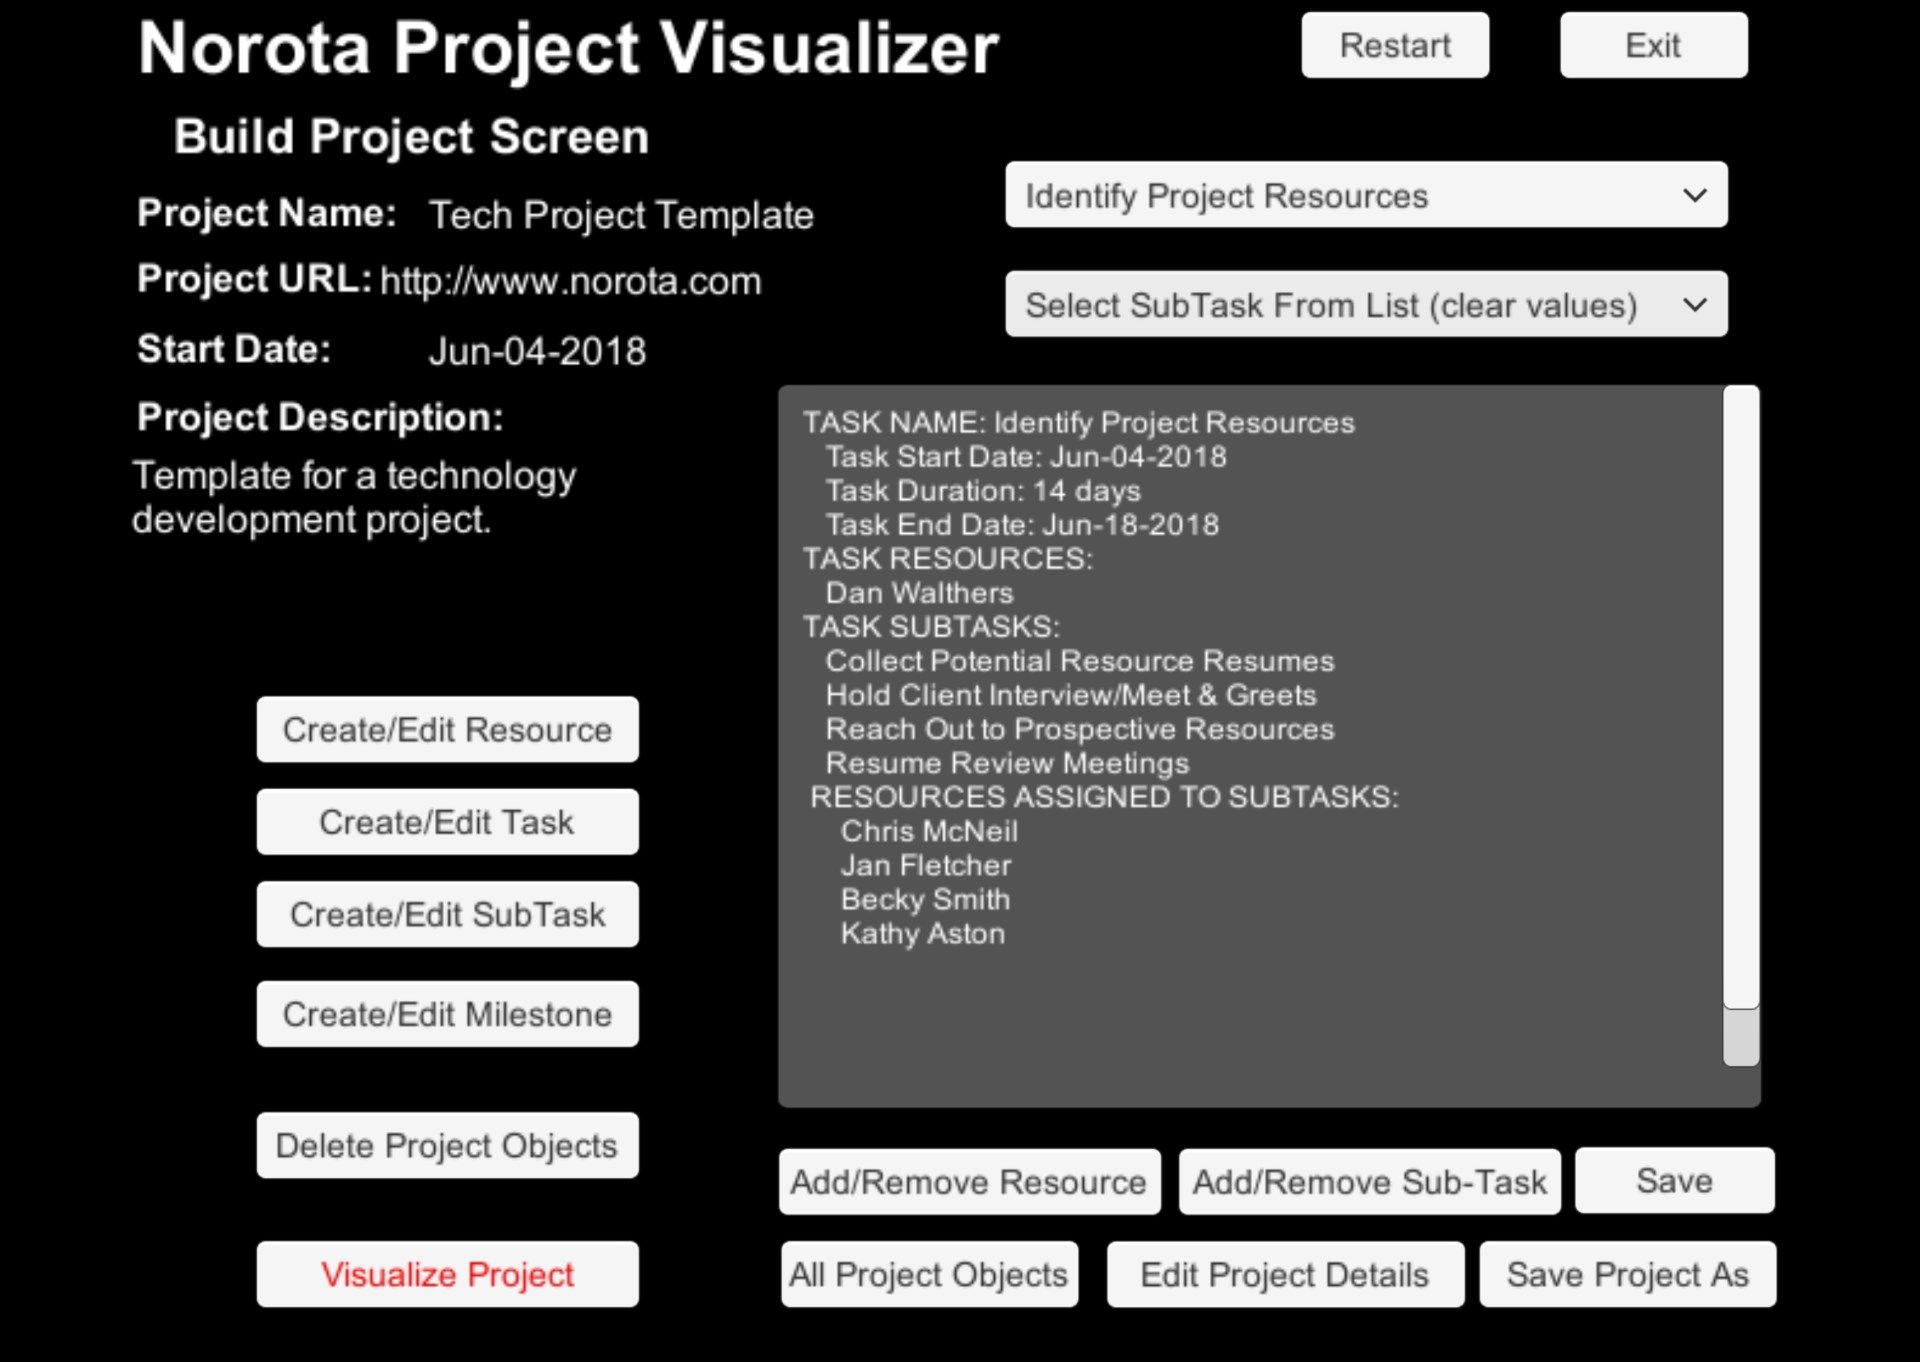 Quickly add subtasks and resources to tasks to build out the project visualization.